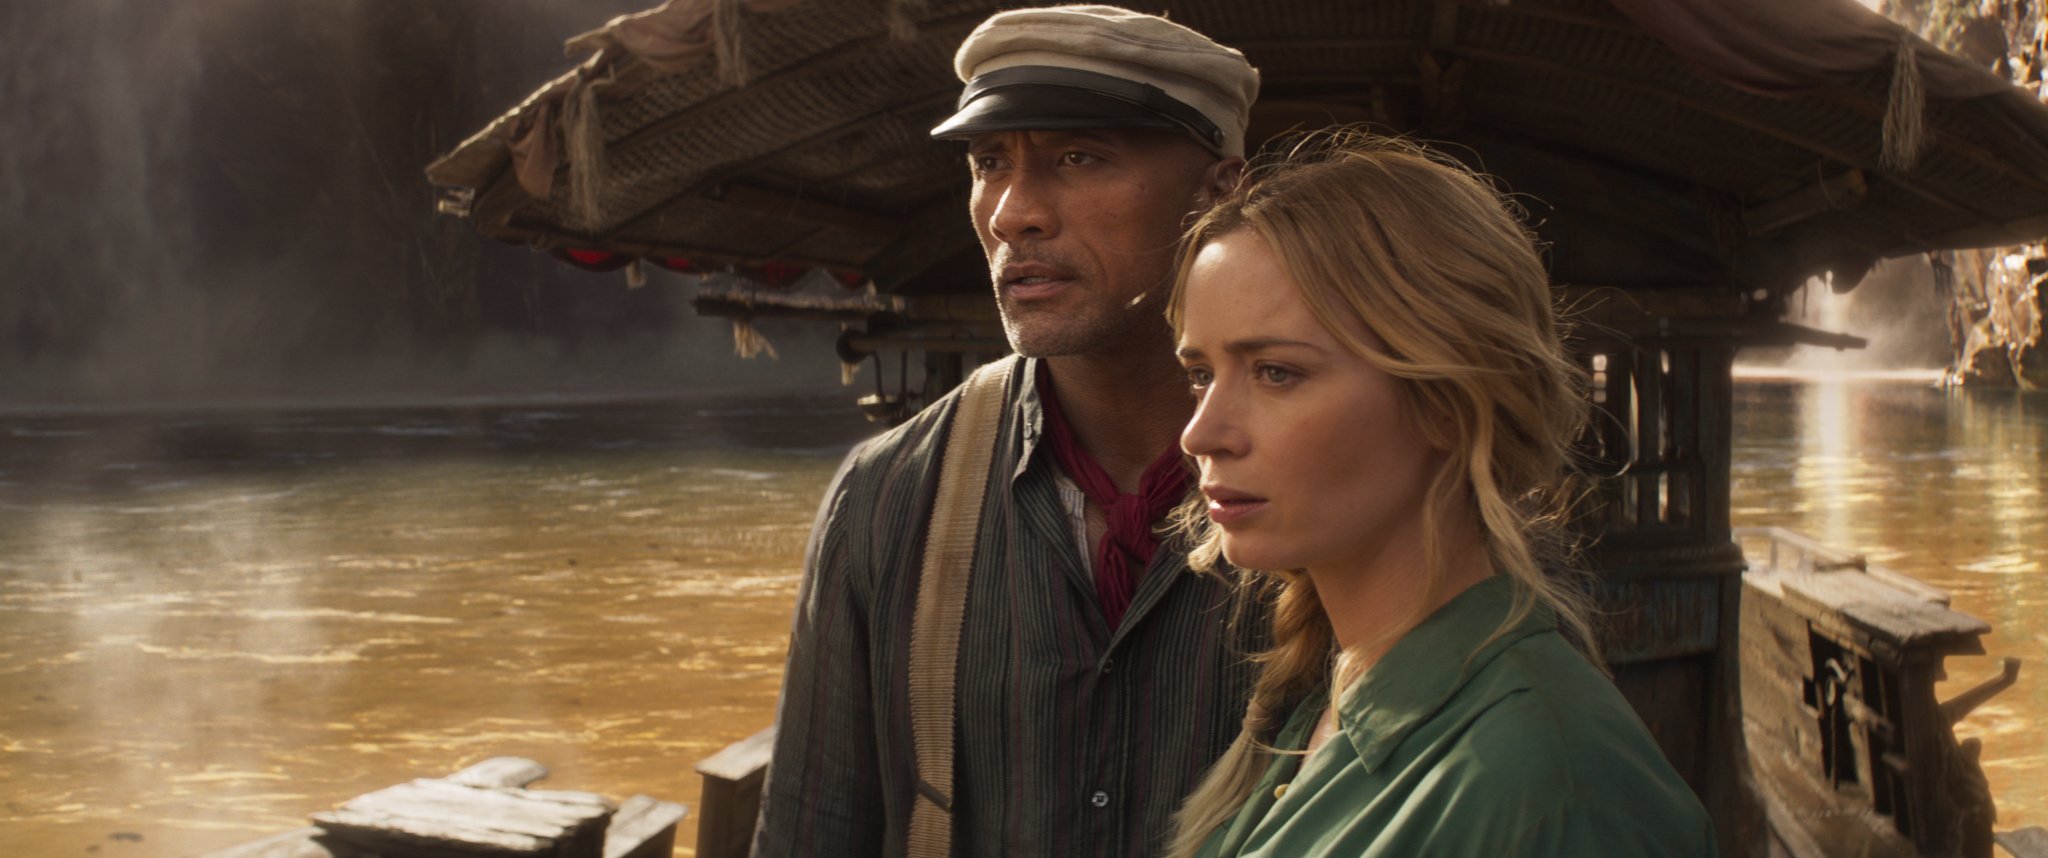 Emily Blunt and Dwayne 'The Rock' Johnson star in Disney's original movie, 'The Jungle Cruise' looking off into the distance in a still from the film